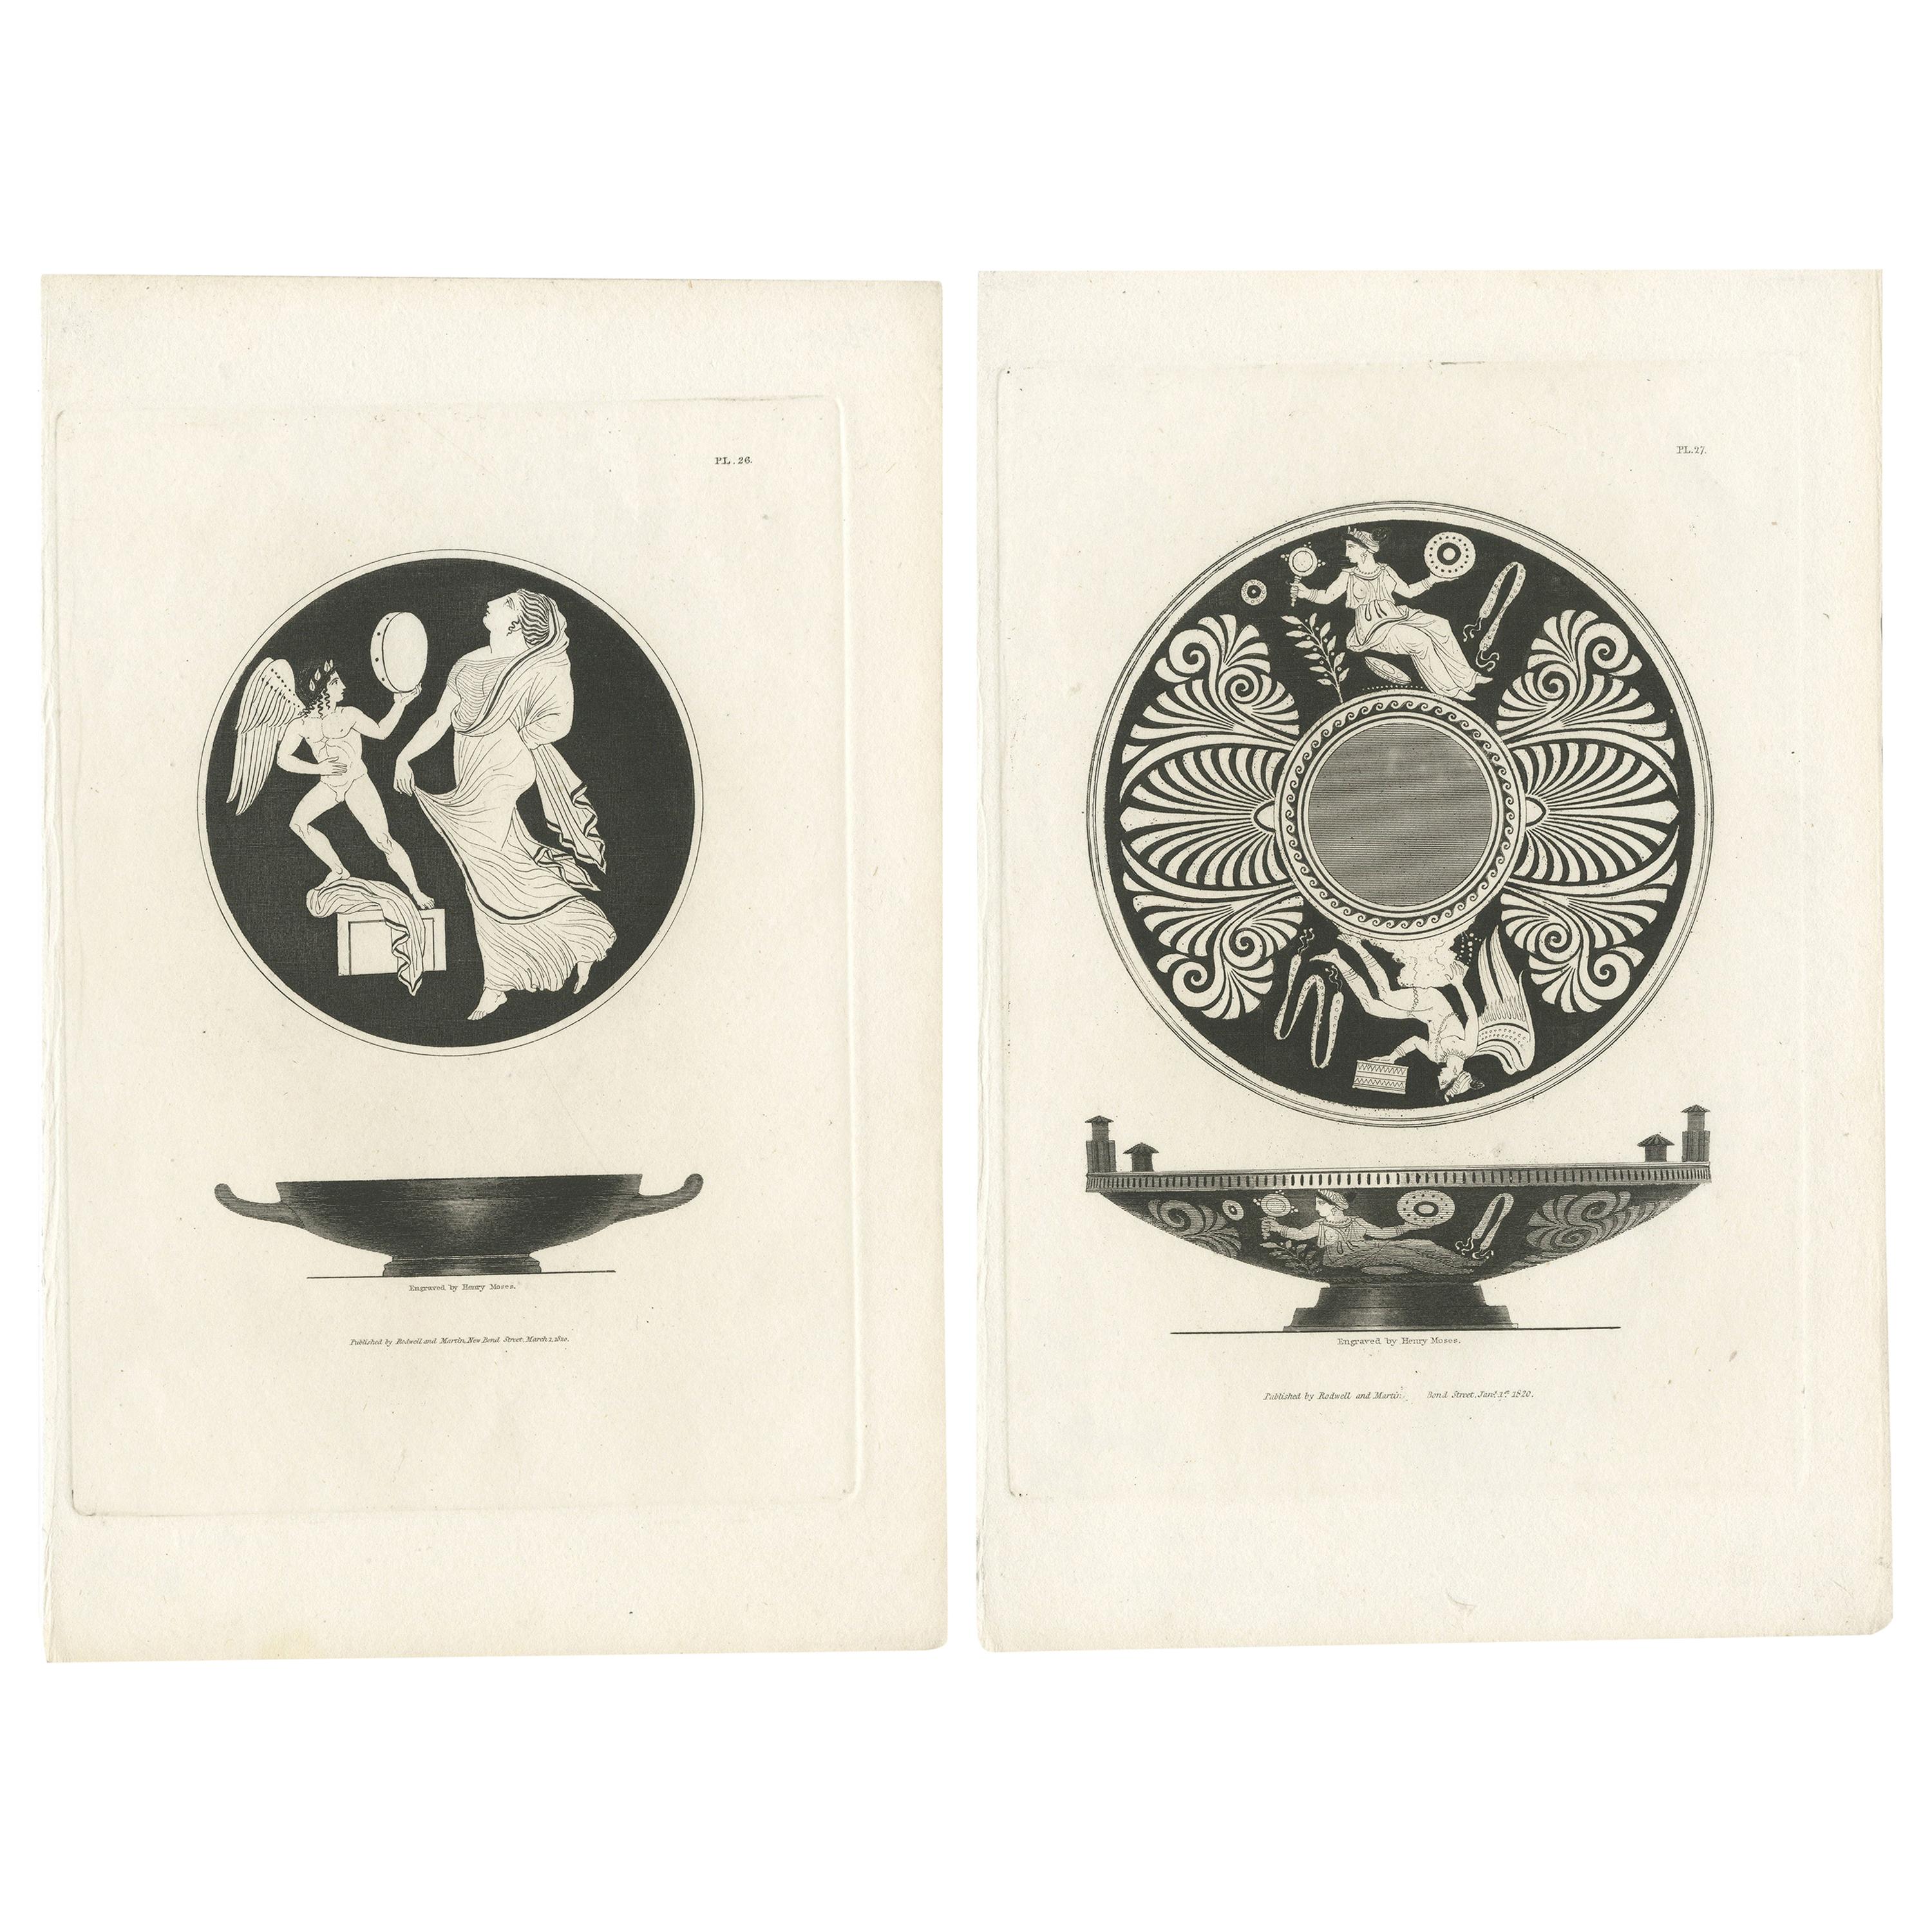 Set of 2 Antique Prints Depicting the Design of Vases/Plates by Moses, 1820